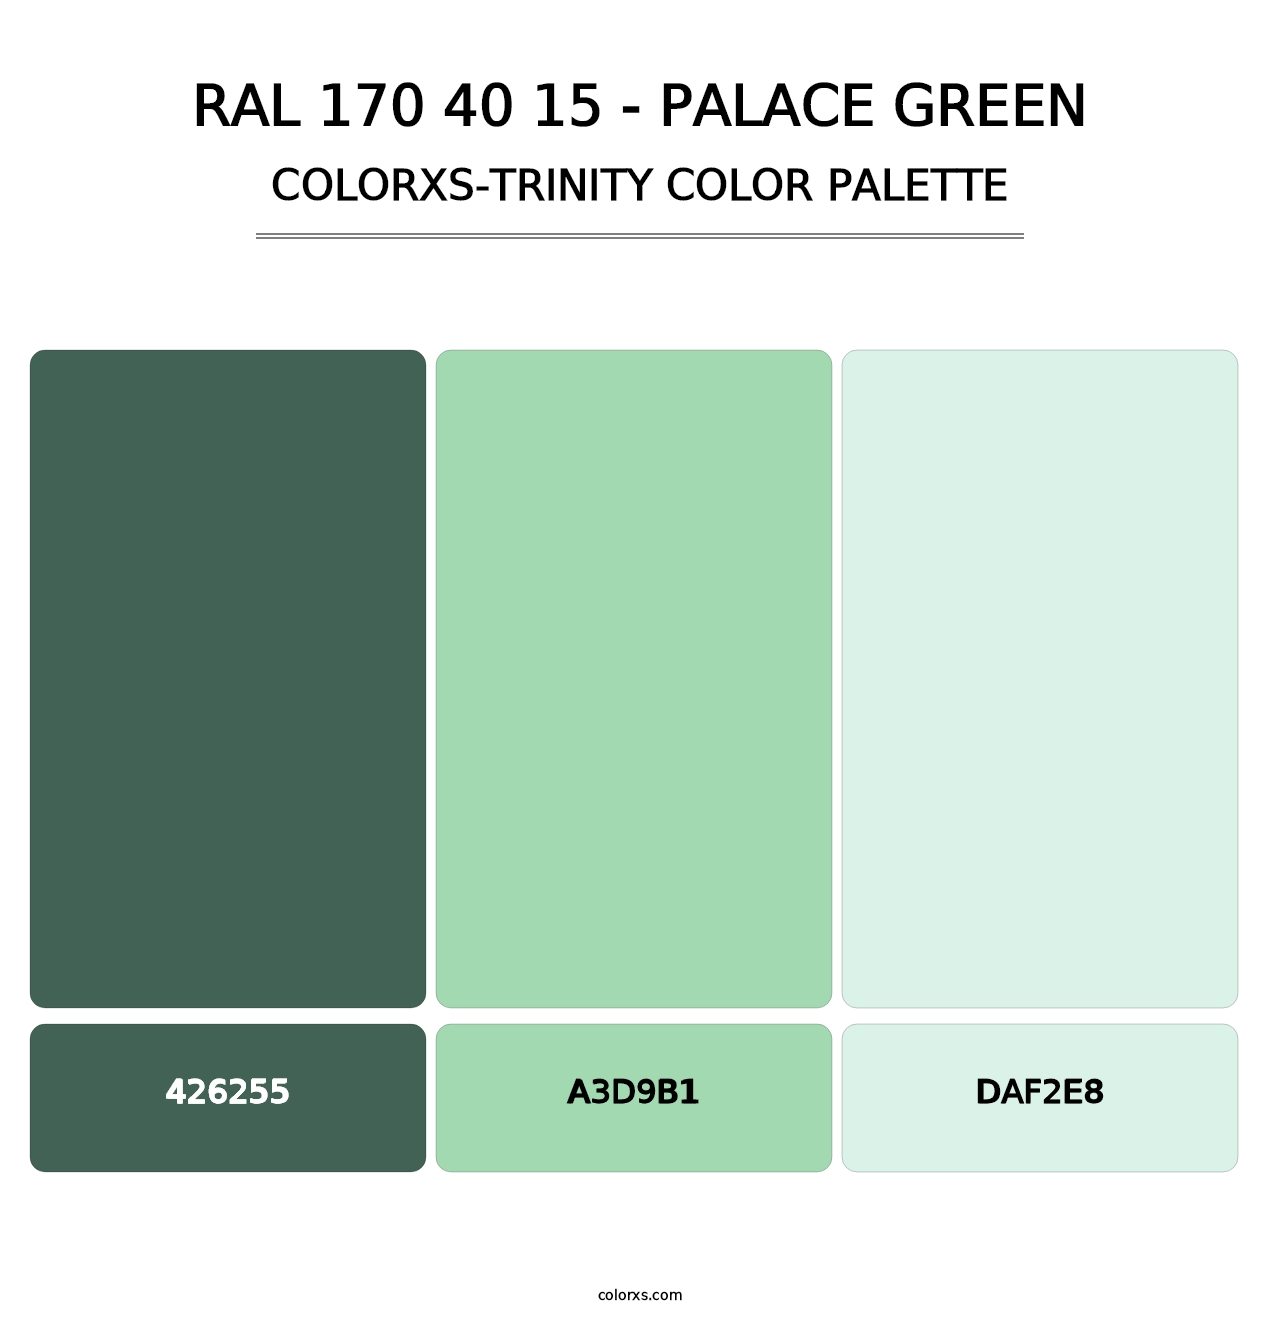 RAL 170 40 15 - Palace Green - Colorxs Trinity Palette